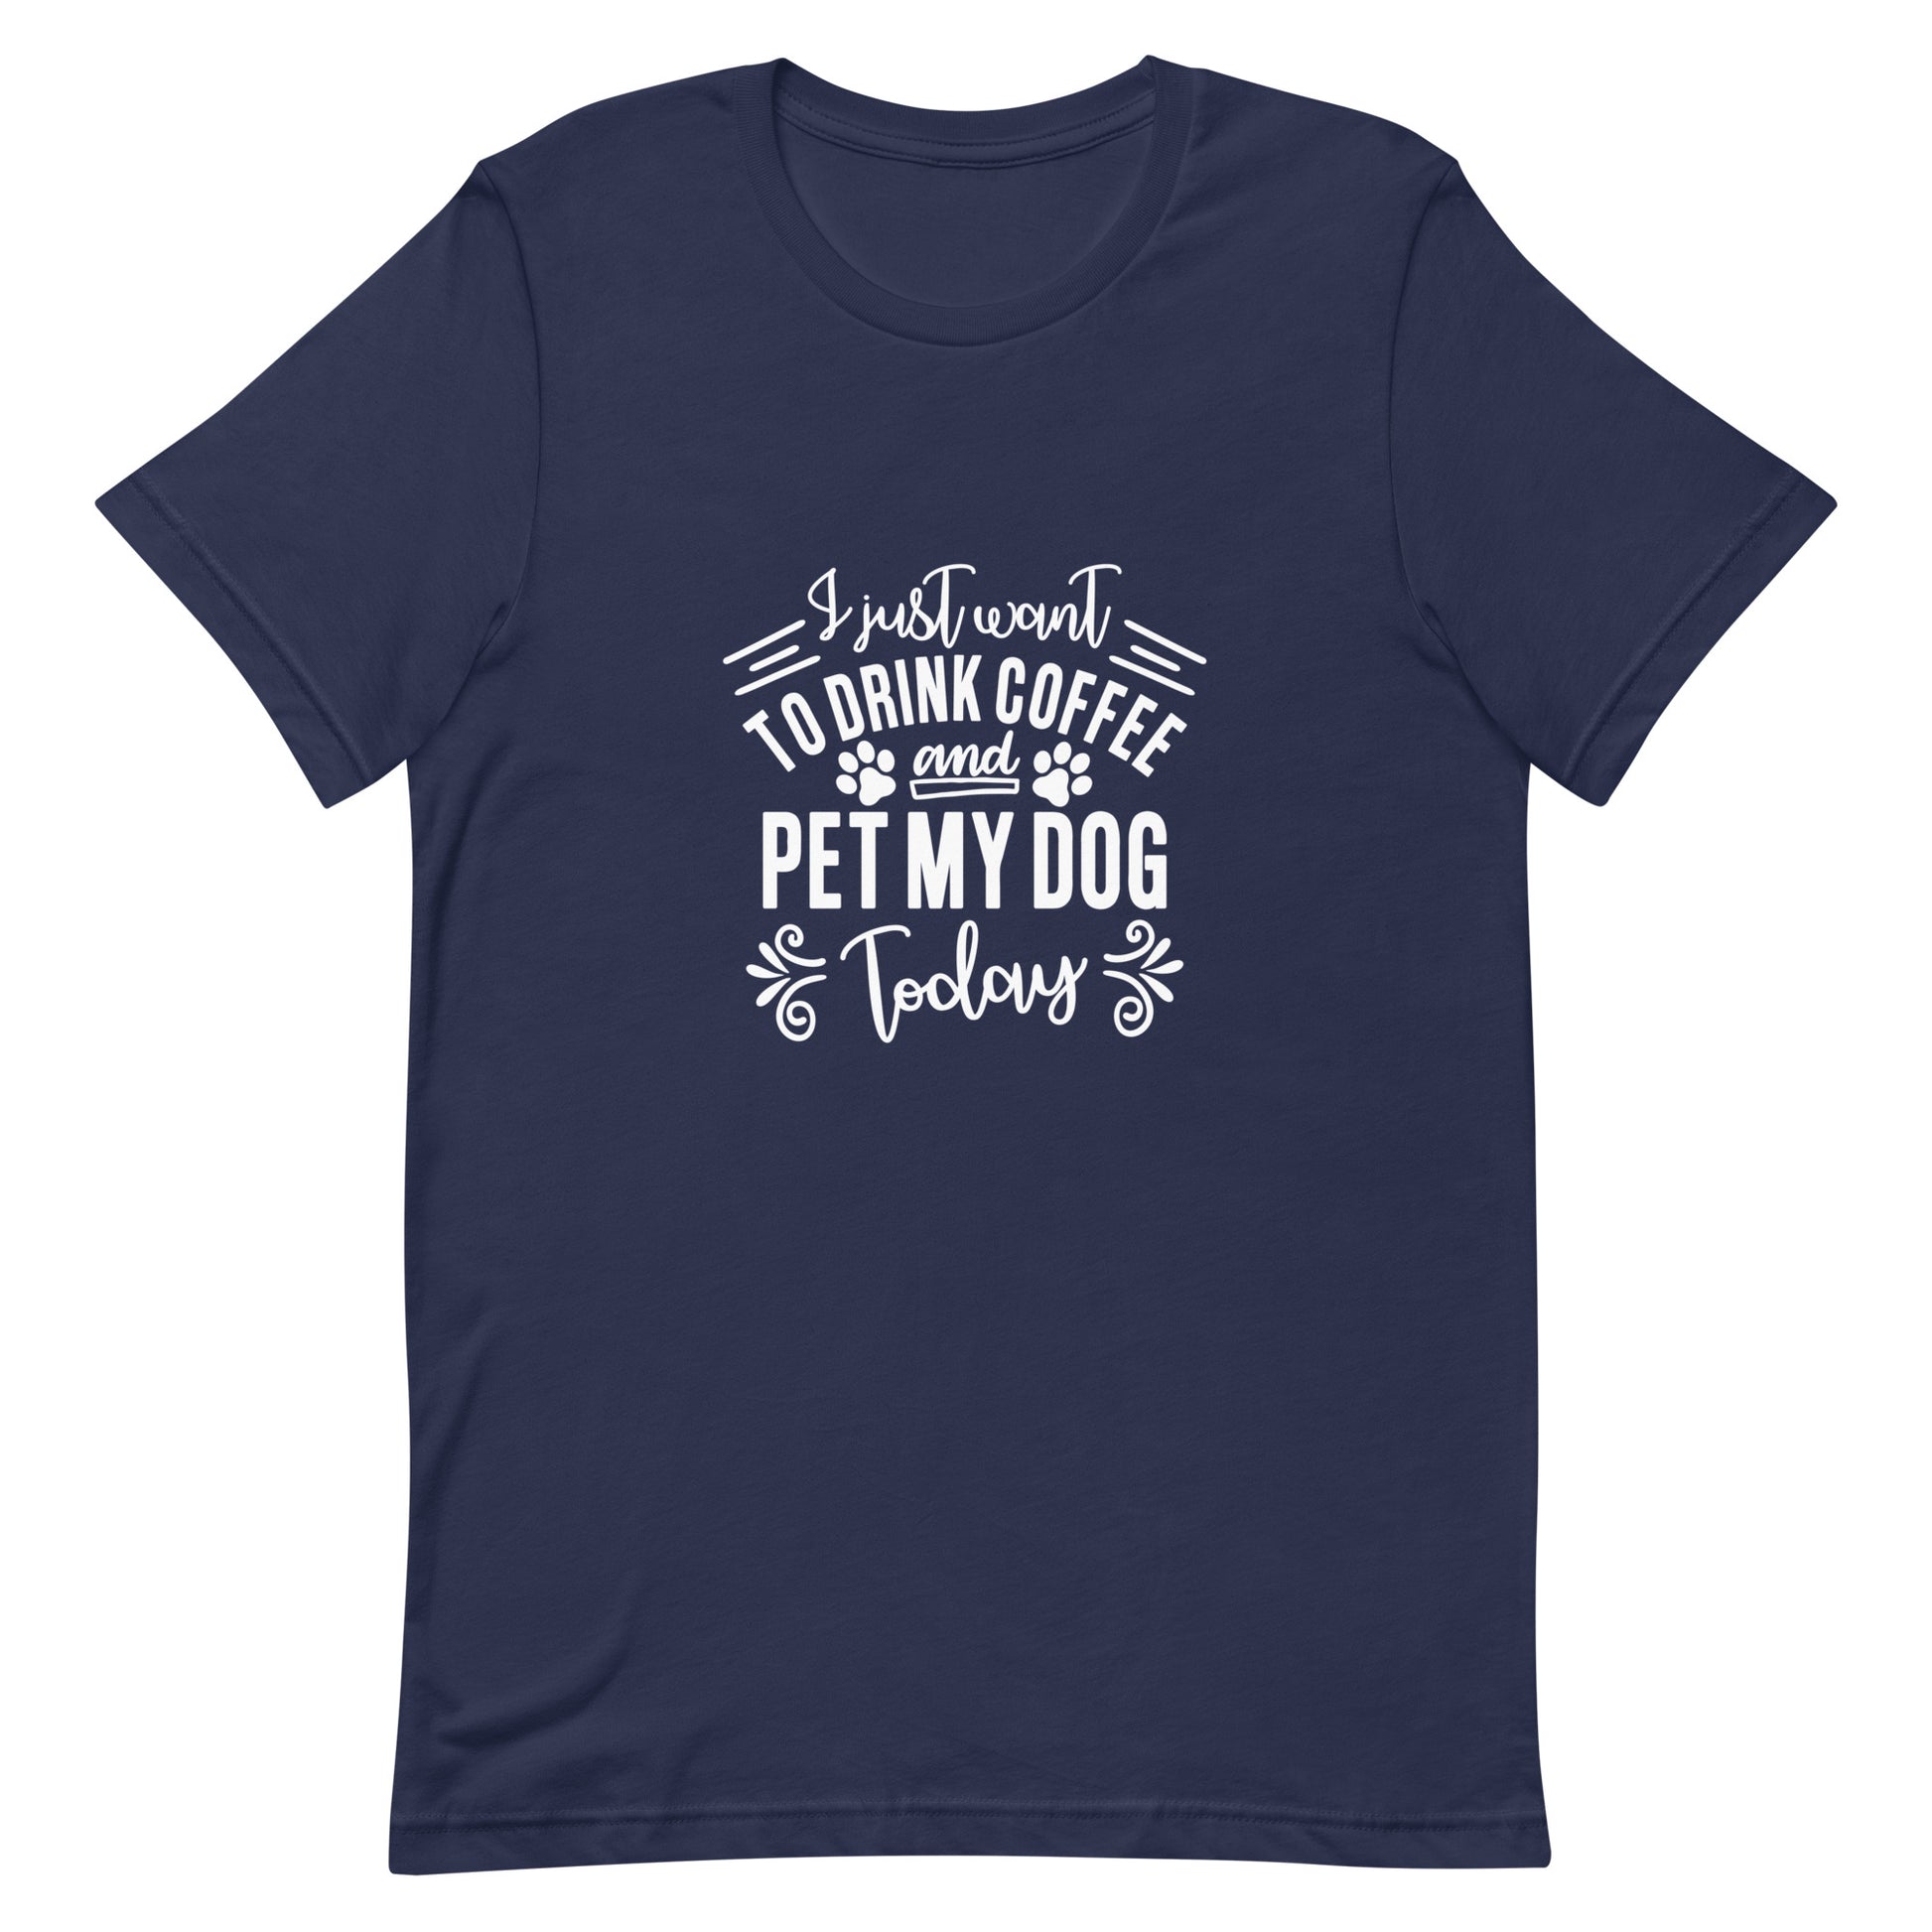 I Just Want to Drink Coffee and Pet My Dog Today Unisex T-shirt